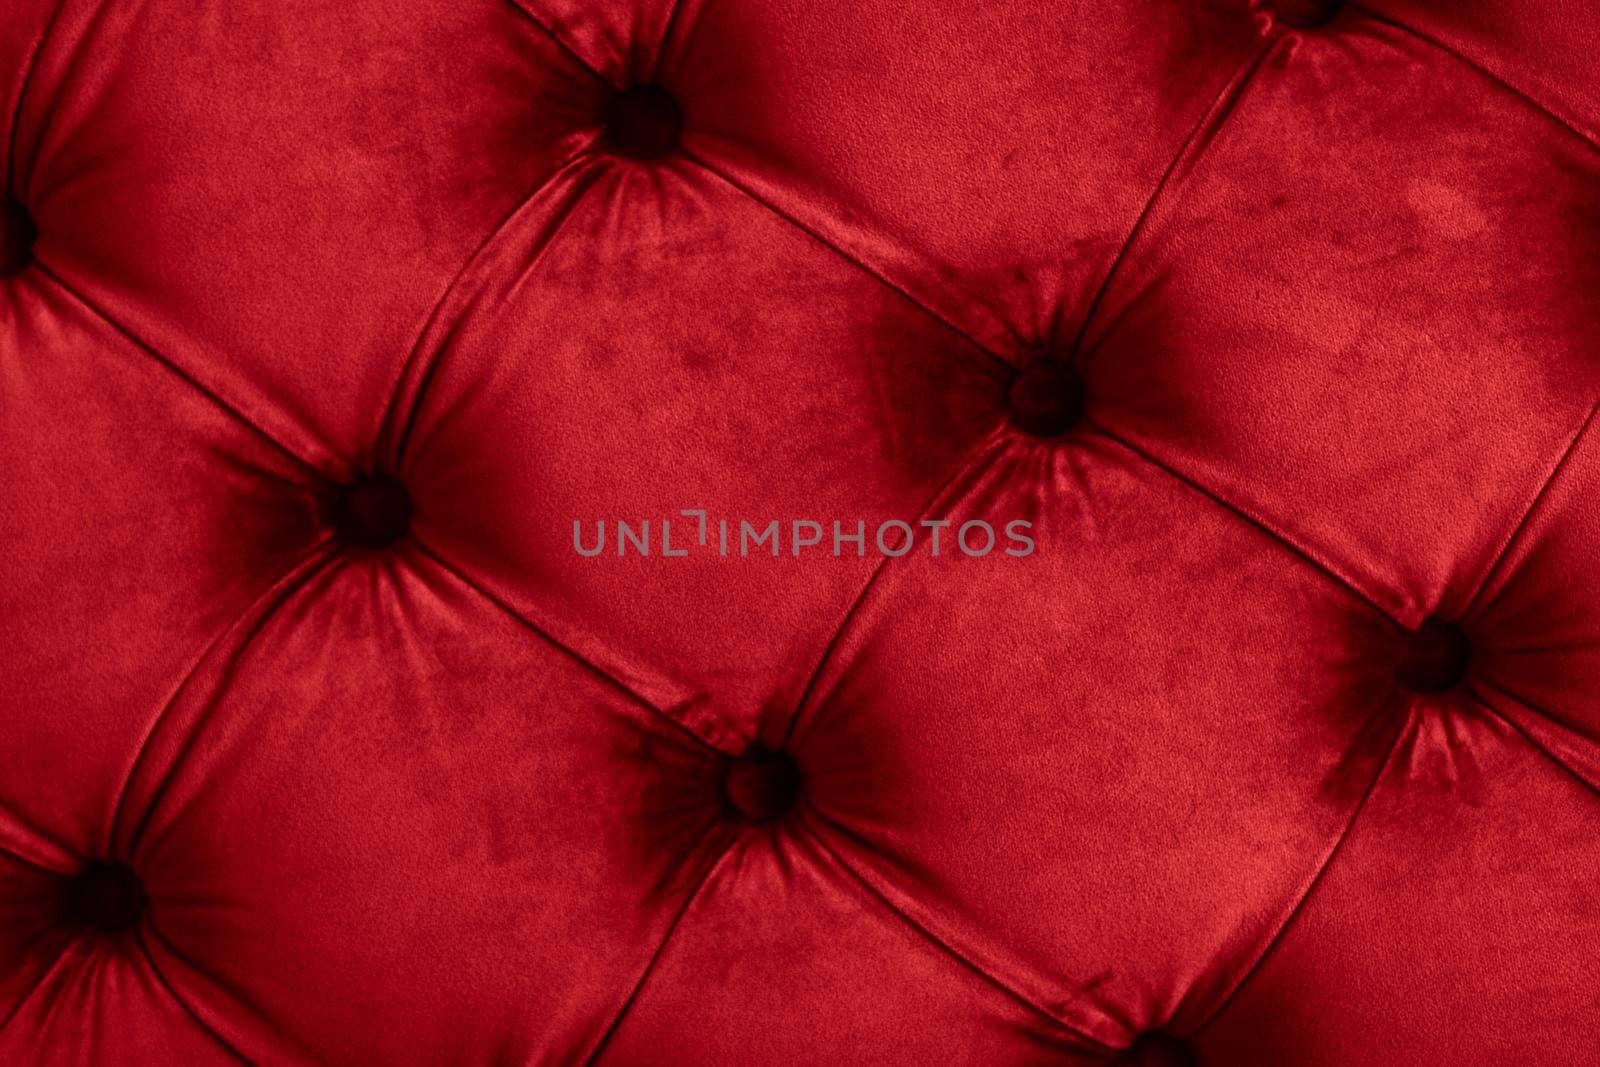 Furniture design, classic interior and royal vintage material concept - Red luxury velour quilted sofa upholstery with buttons, elegant home decor texture and background